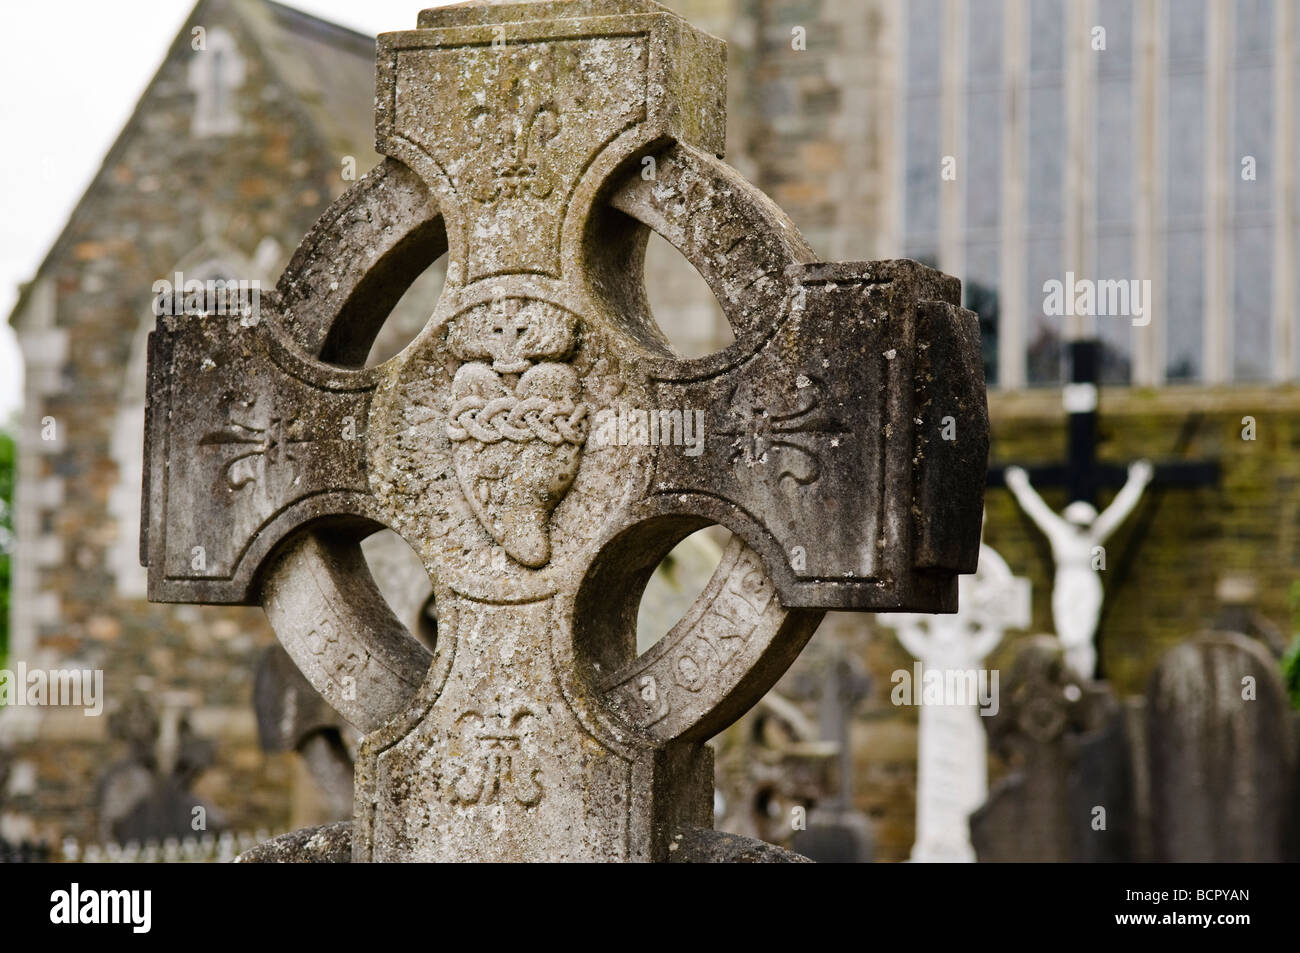 Granite celtic cross with sacred heart carved in centre, in a church graveyard. Stock Photo